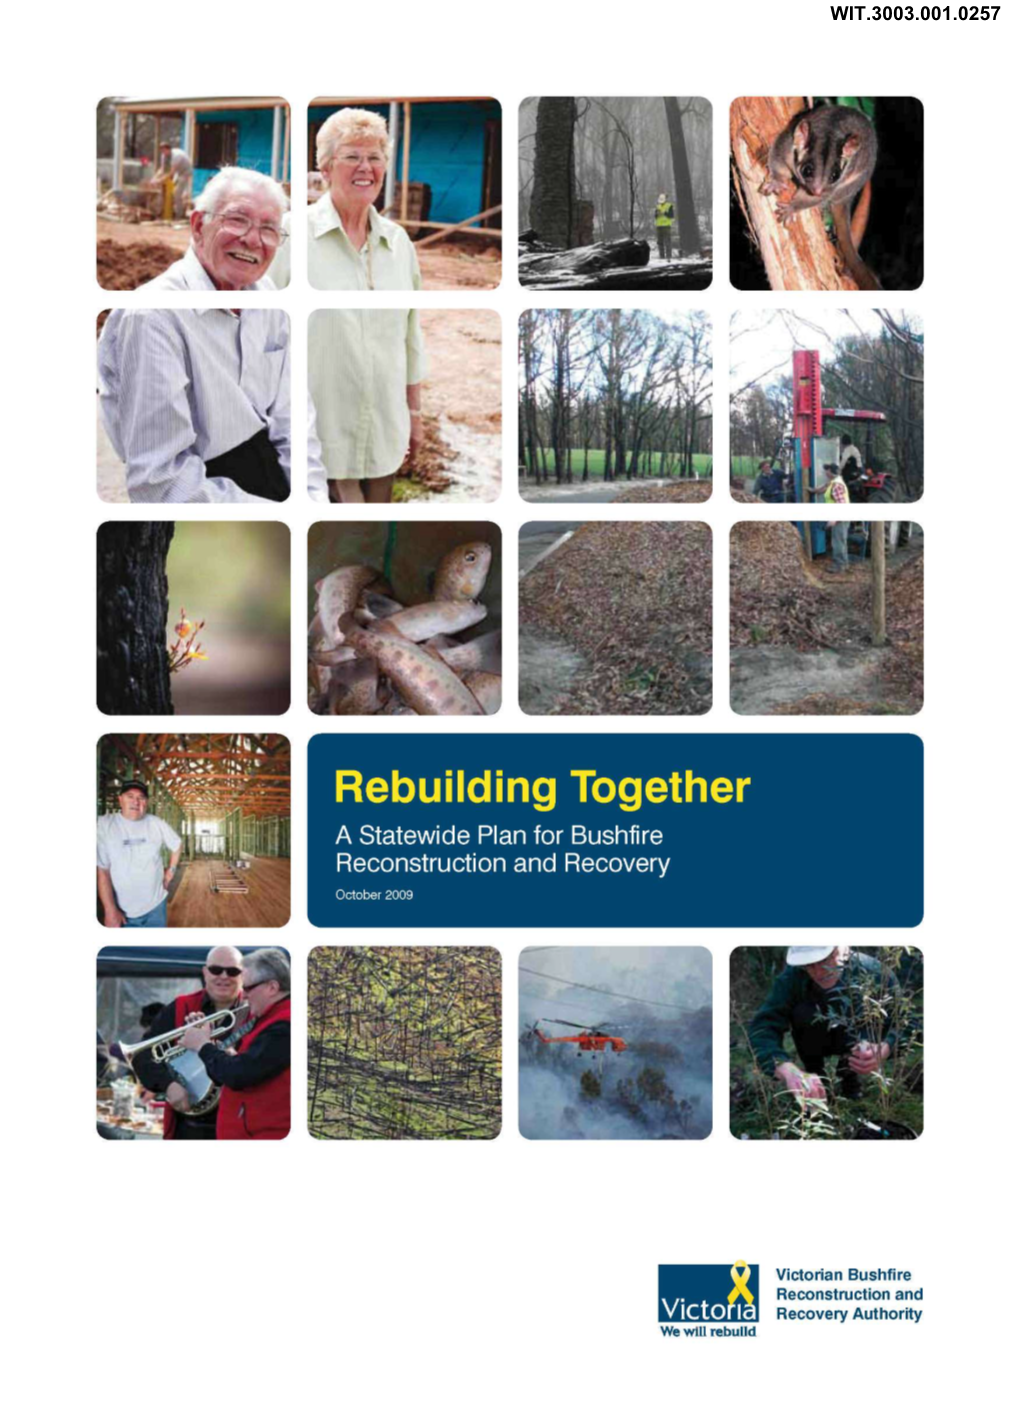 Rebuilding Together a Statewide Plan for Bushfire Reconstruction and Recovery October 2009